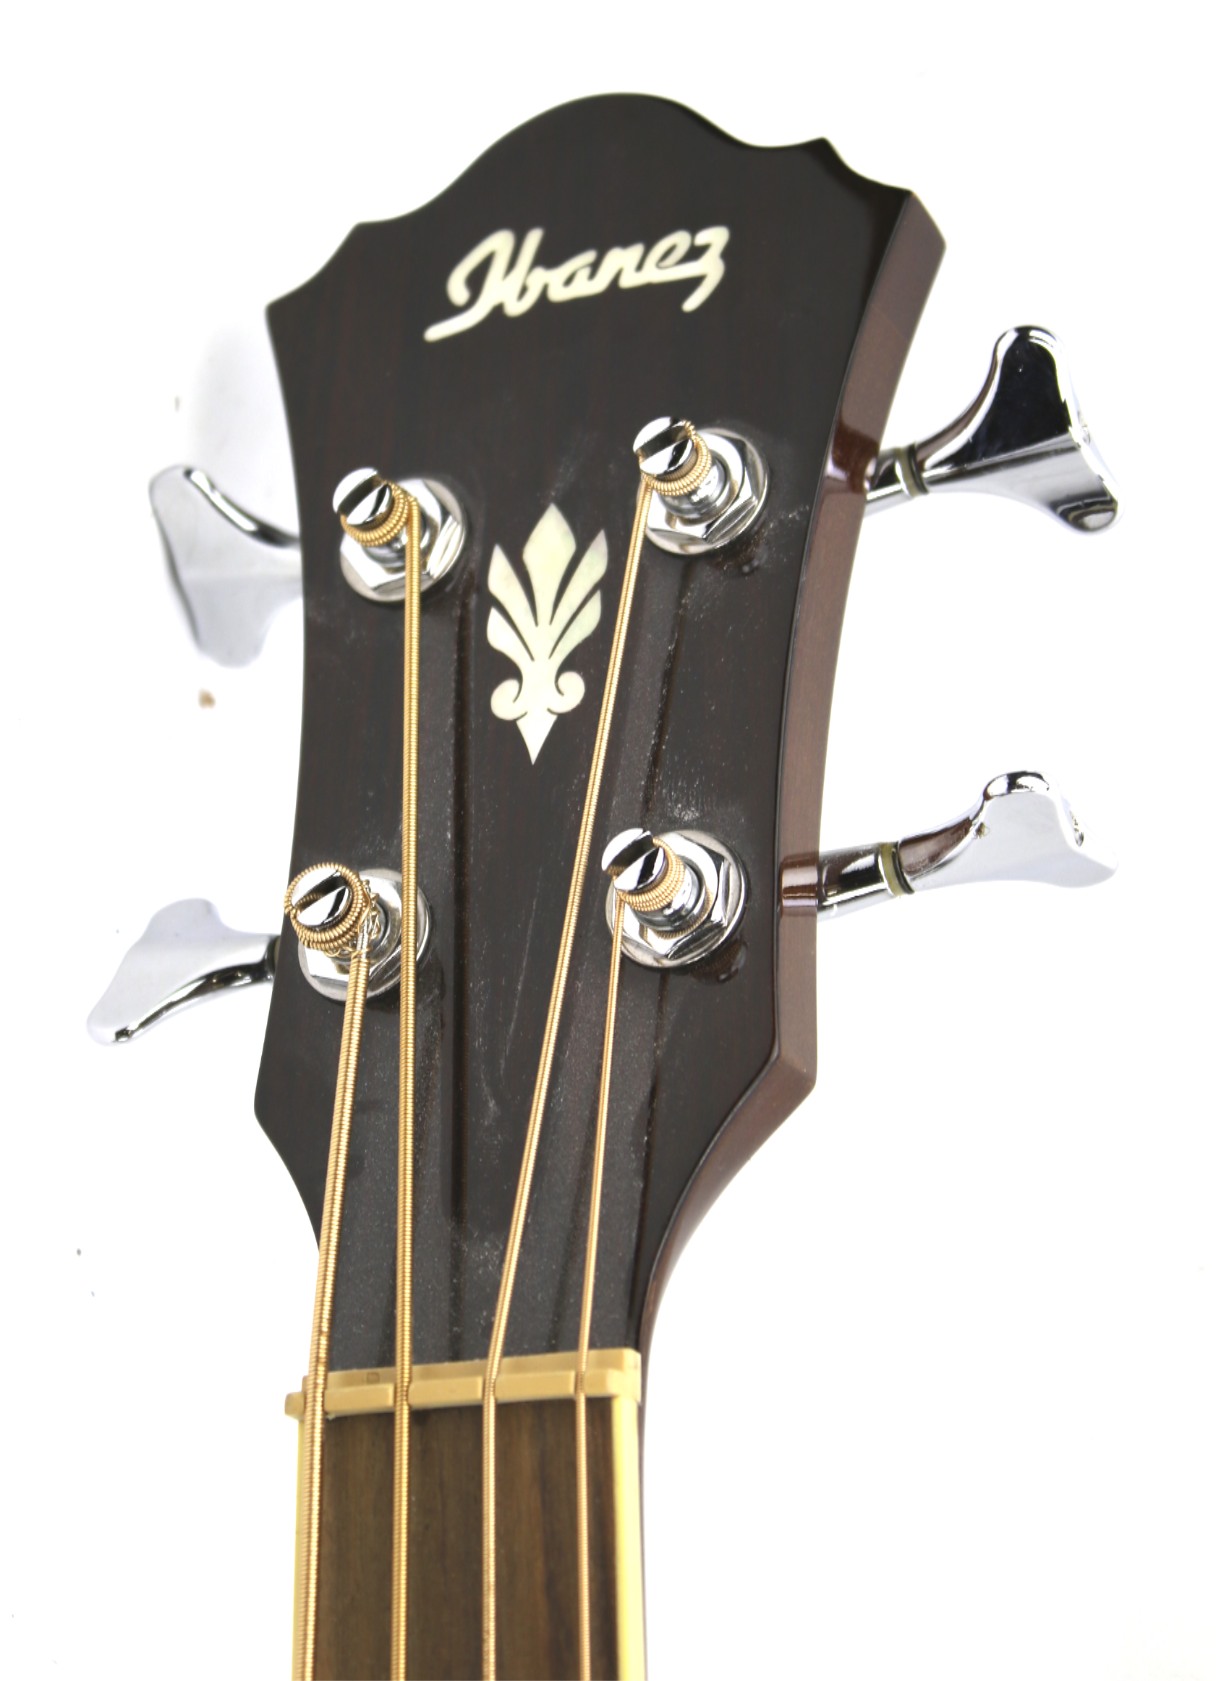 Ibanez Acoustic bass guitar, - Image 2 of 2